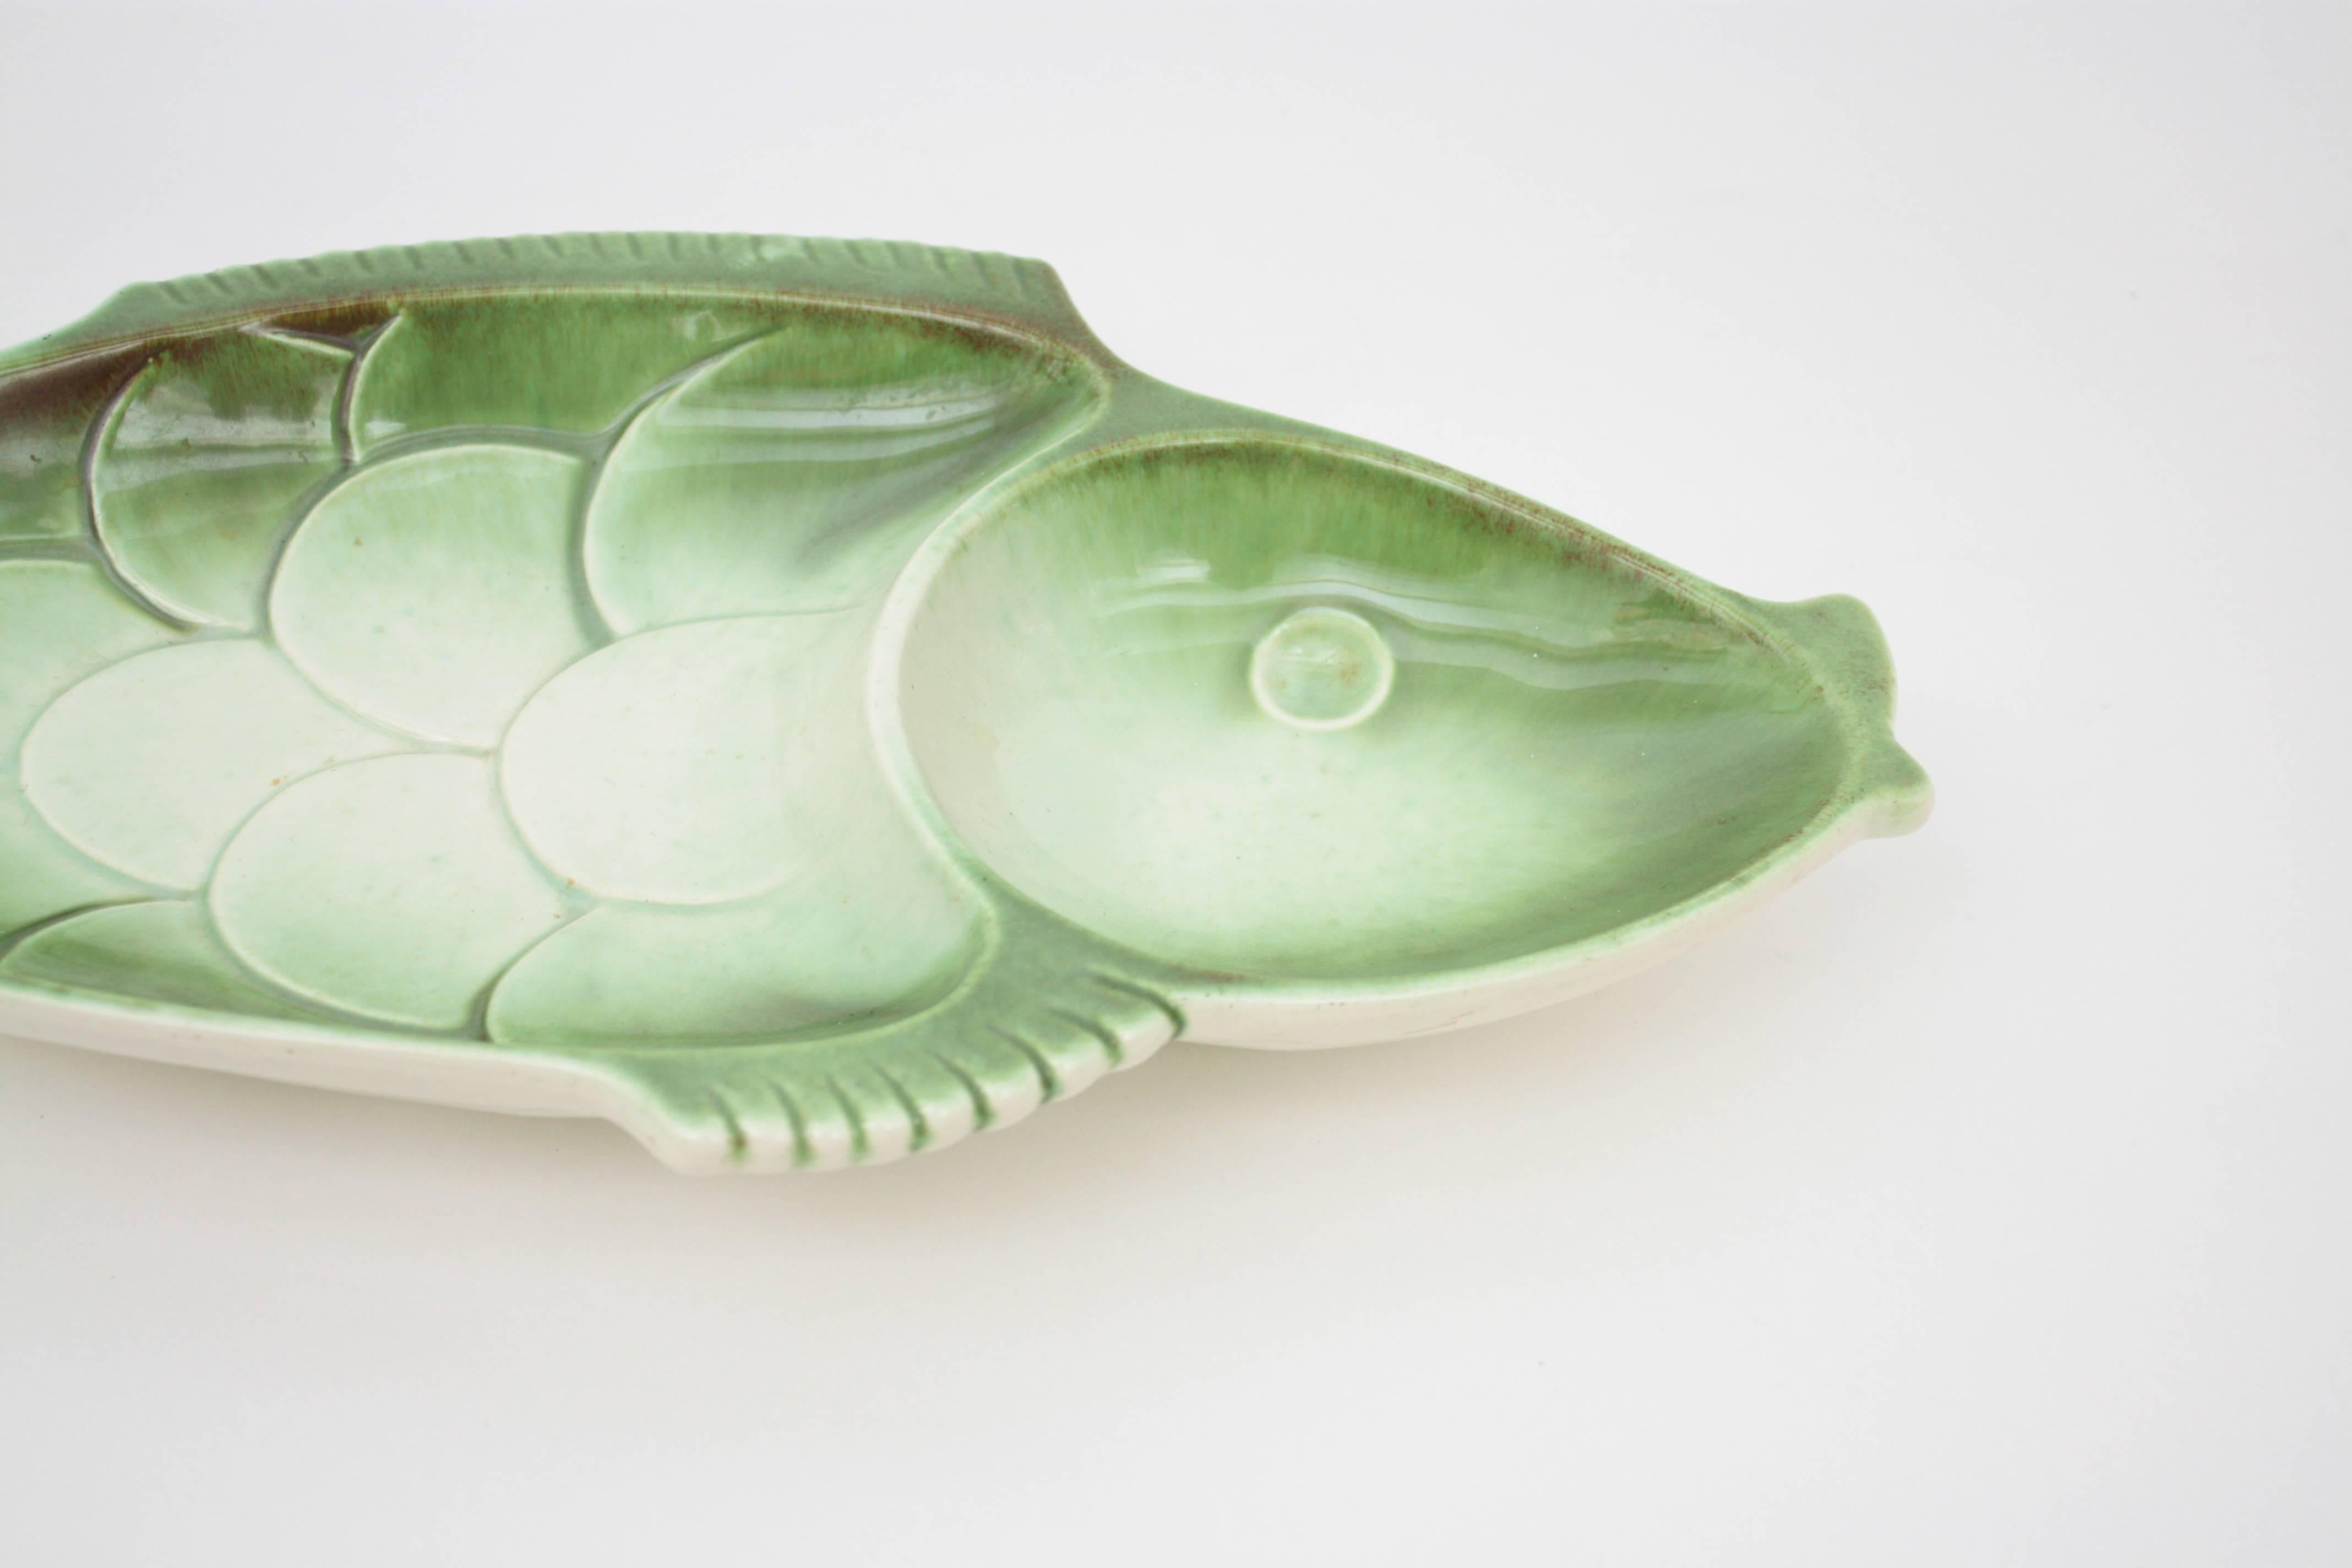 Beautiful ceramic fish platter designed and produced by Royal Haeger, USA, 1950s.
It has the original trade mark engraved at the back.

Useful as serveware or for decorative purposes or wall decoration.

More pieces in this manner are